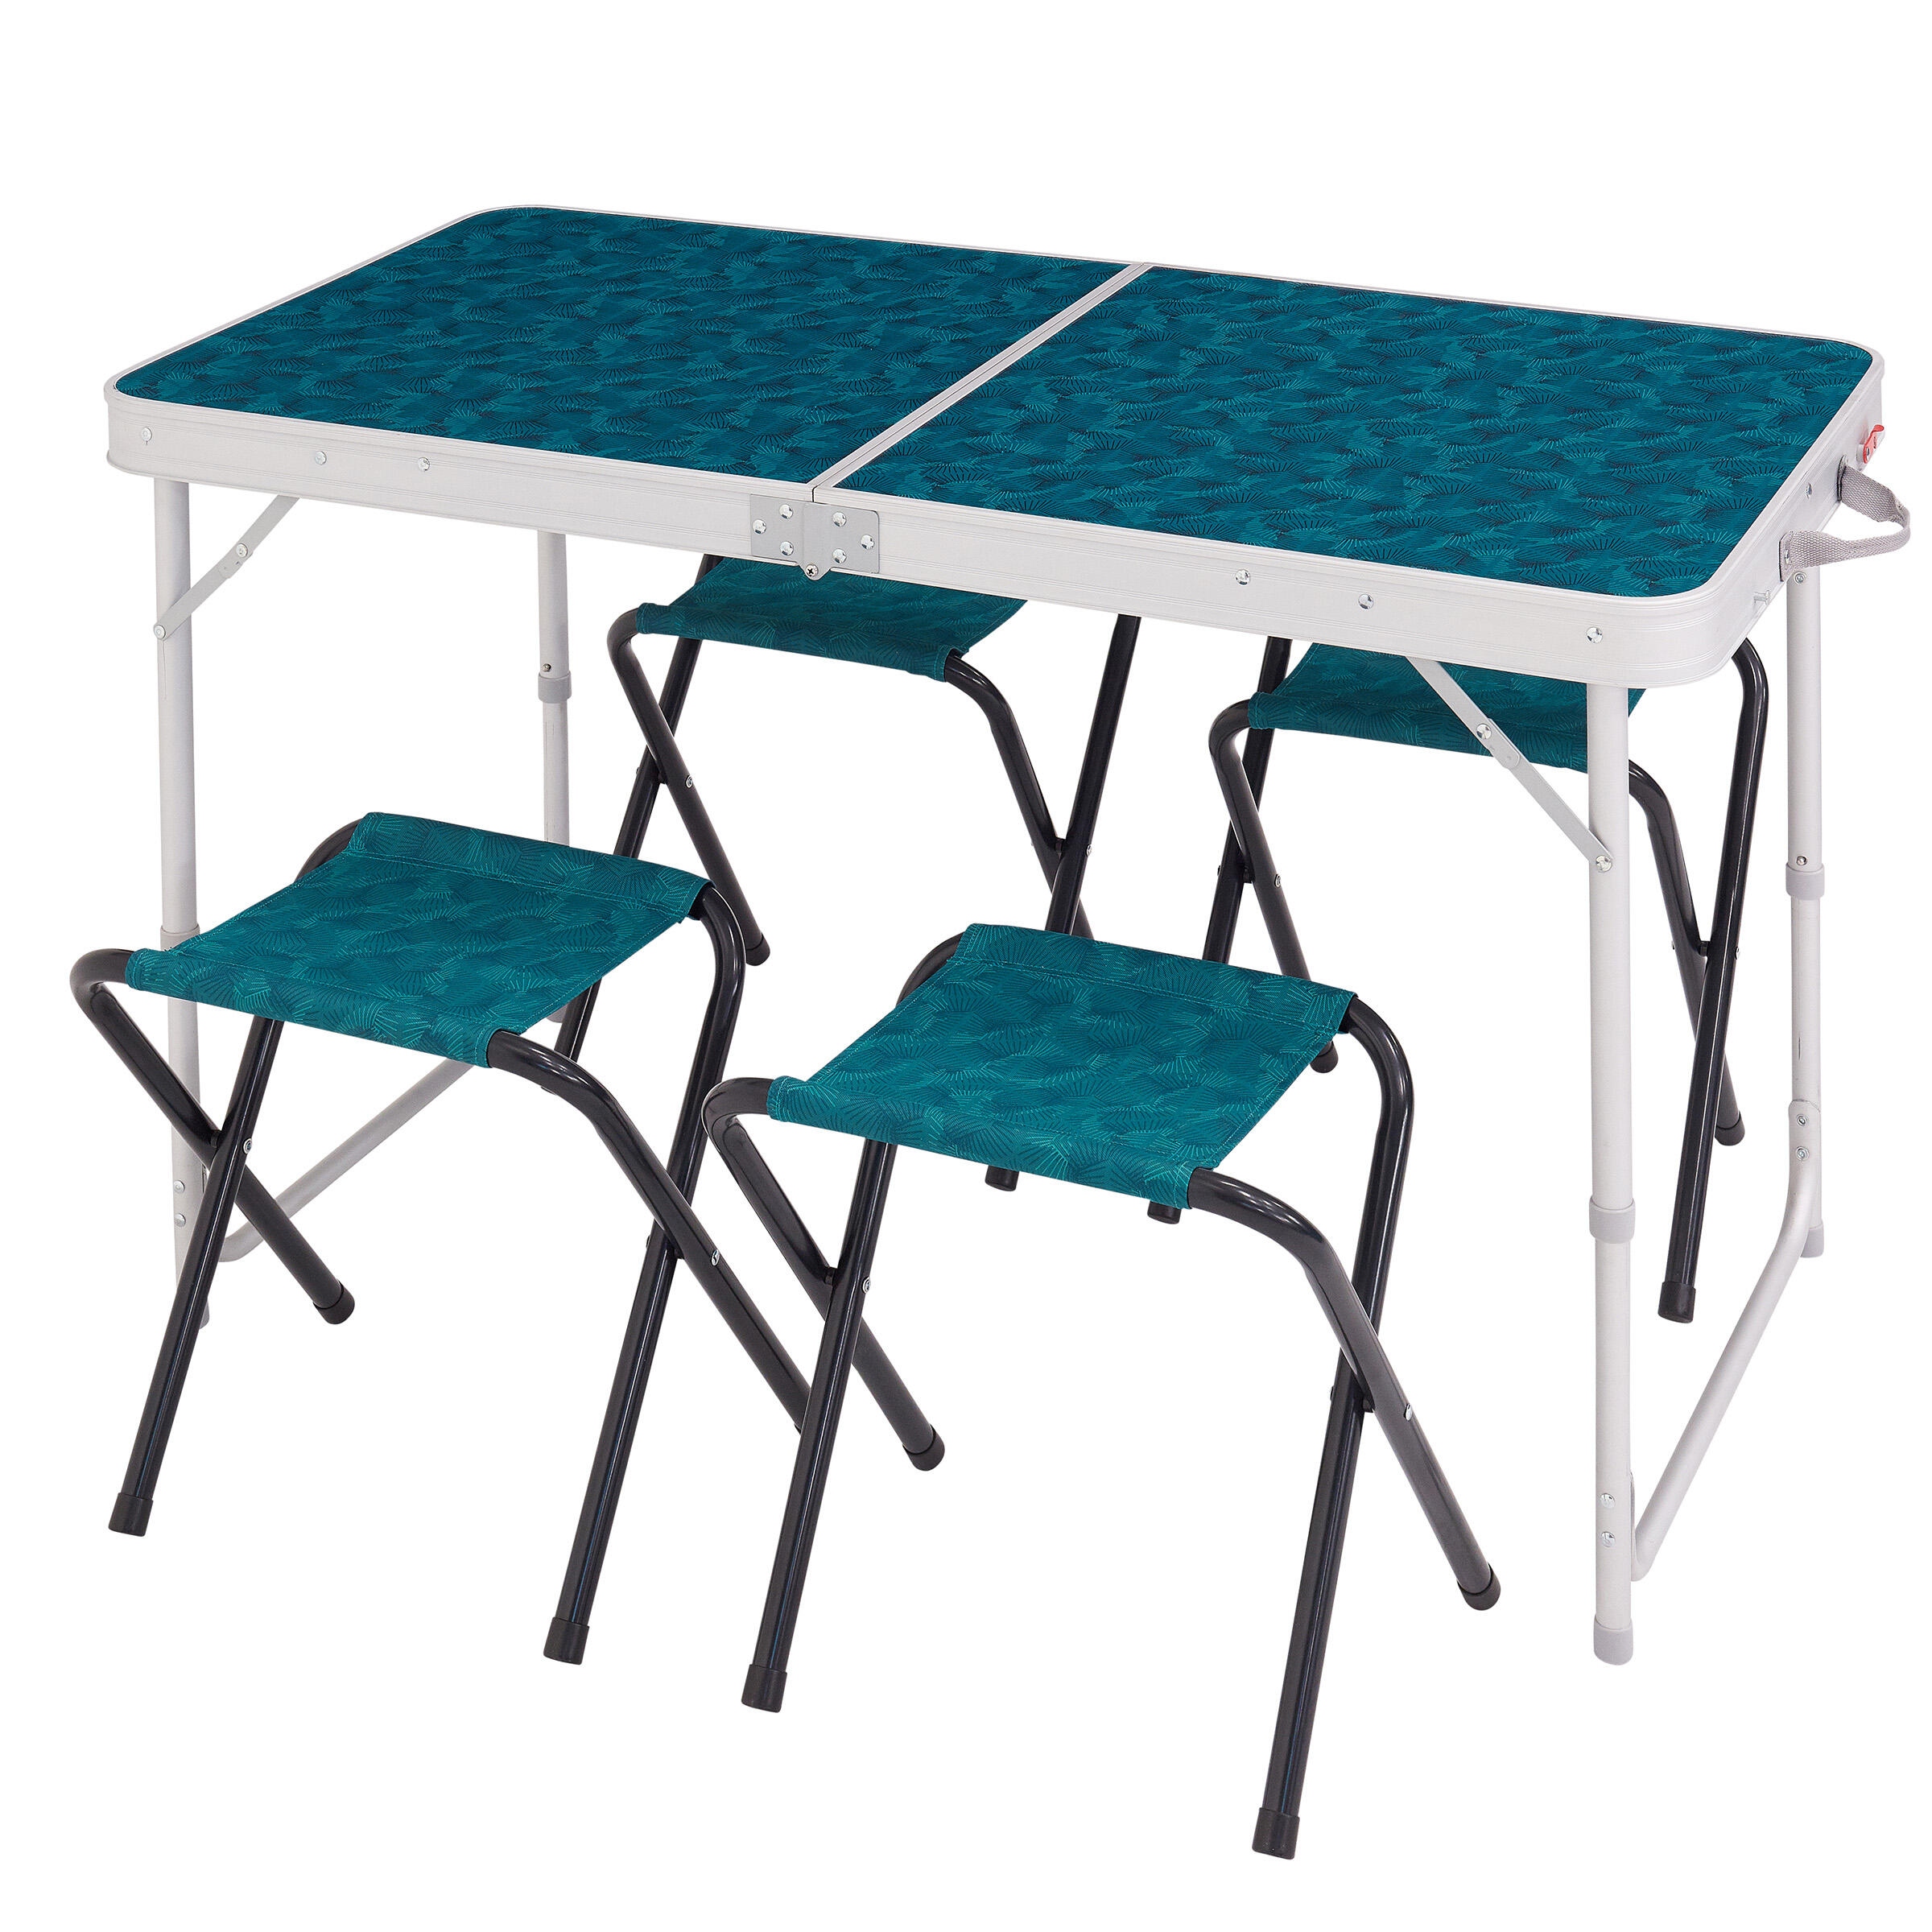 FOLDING CAMPING TABLE WITH 4 STOOLS